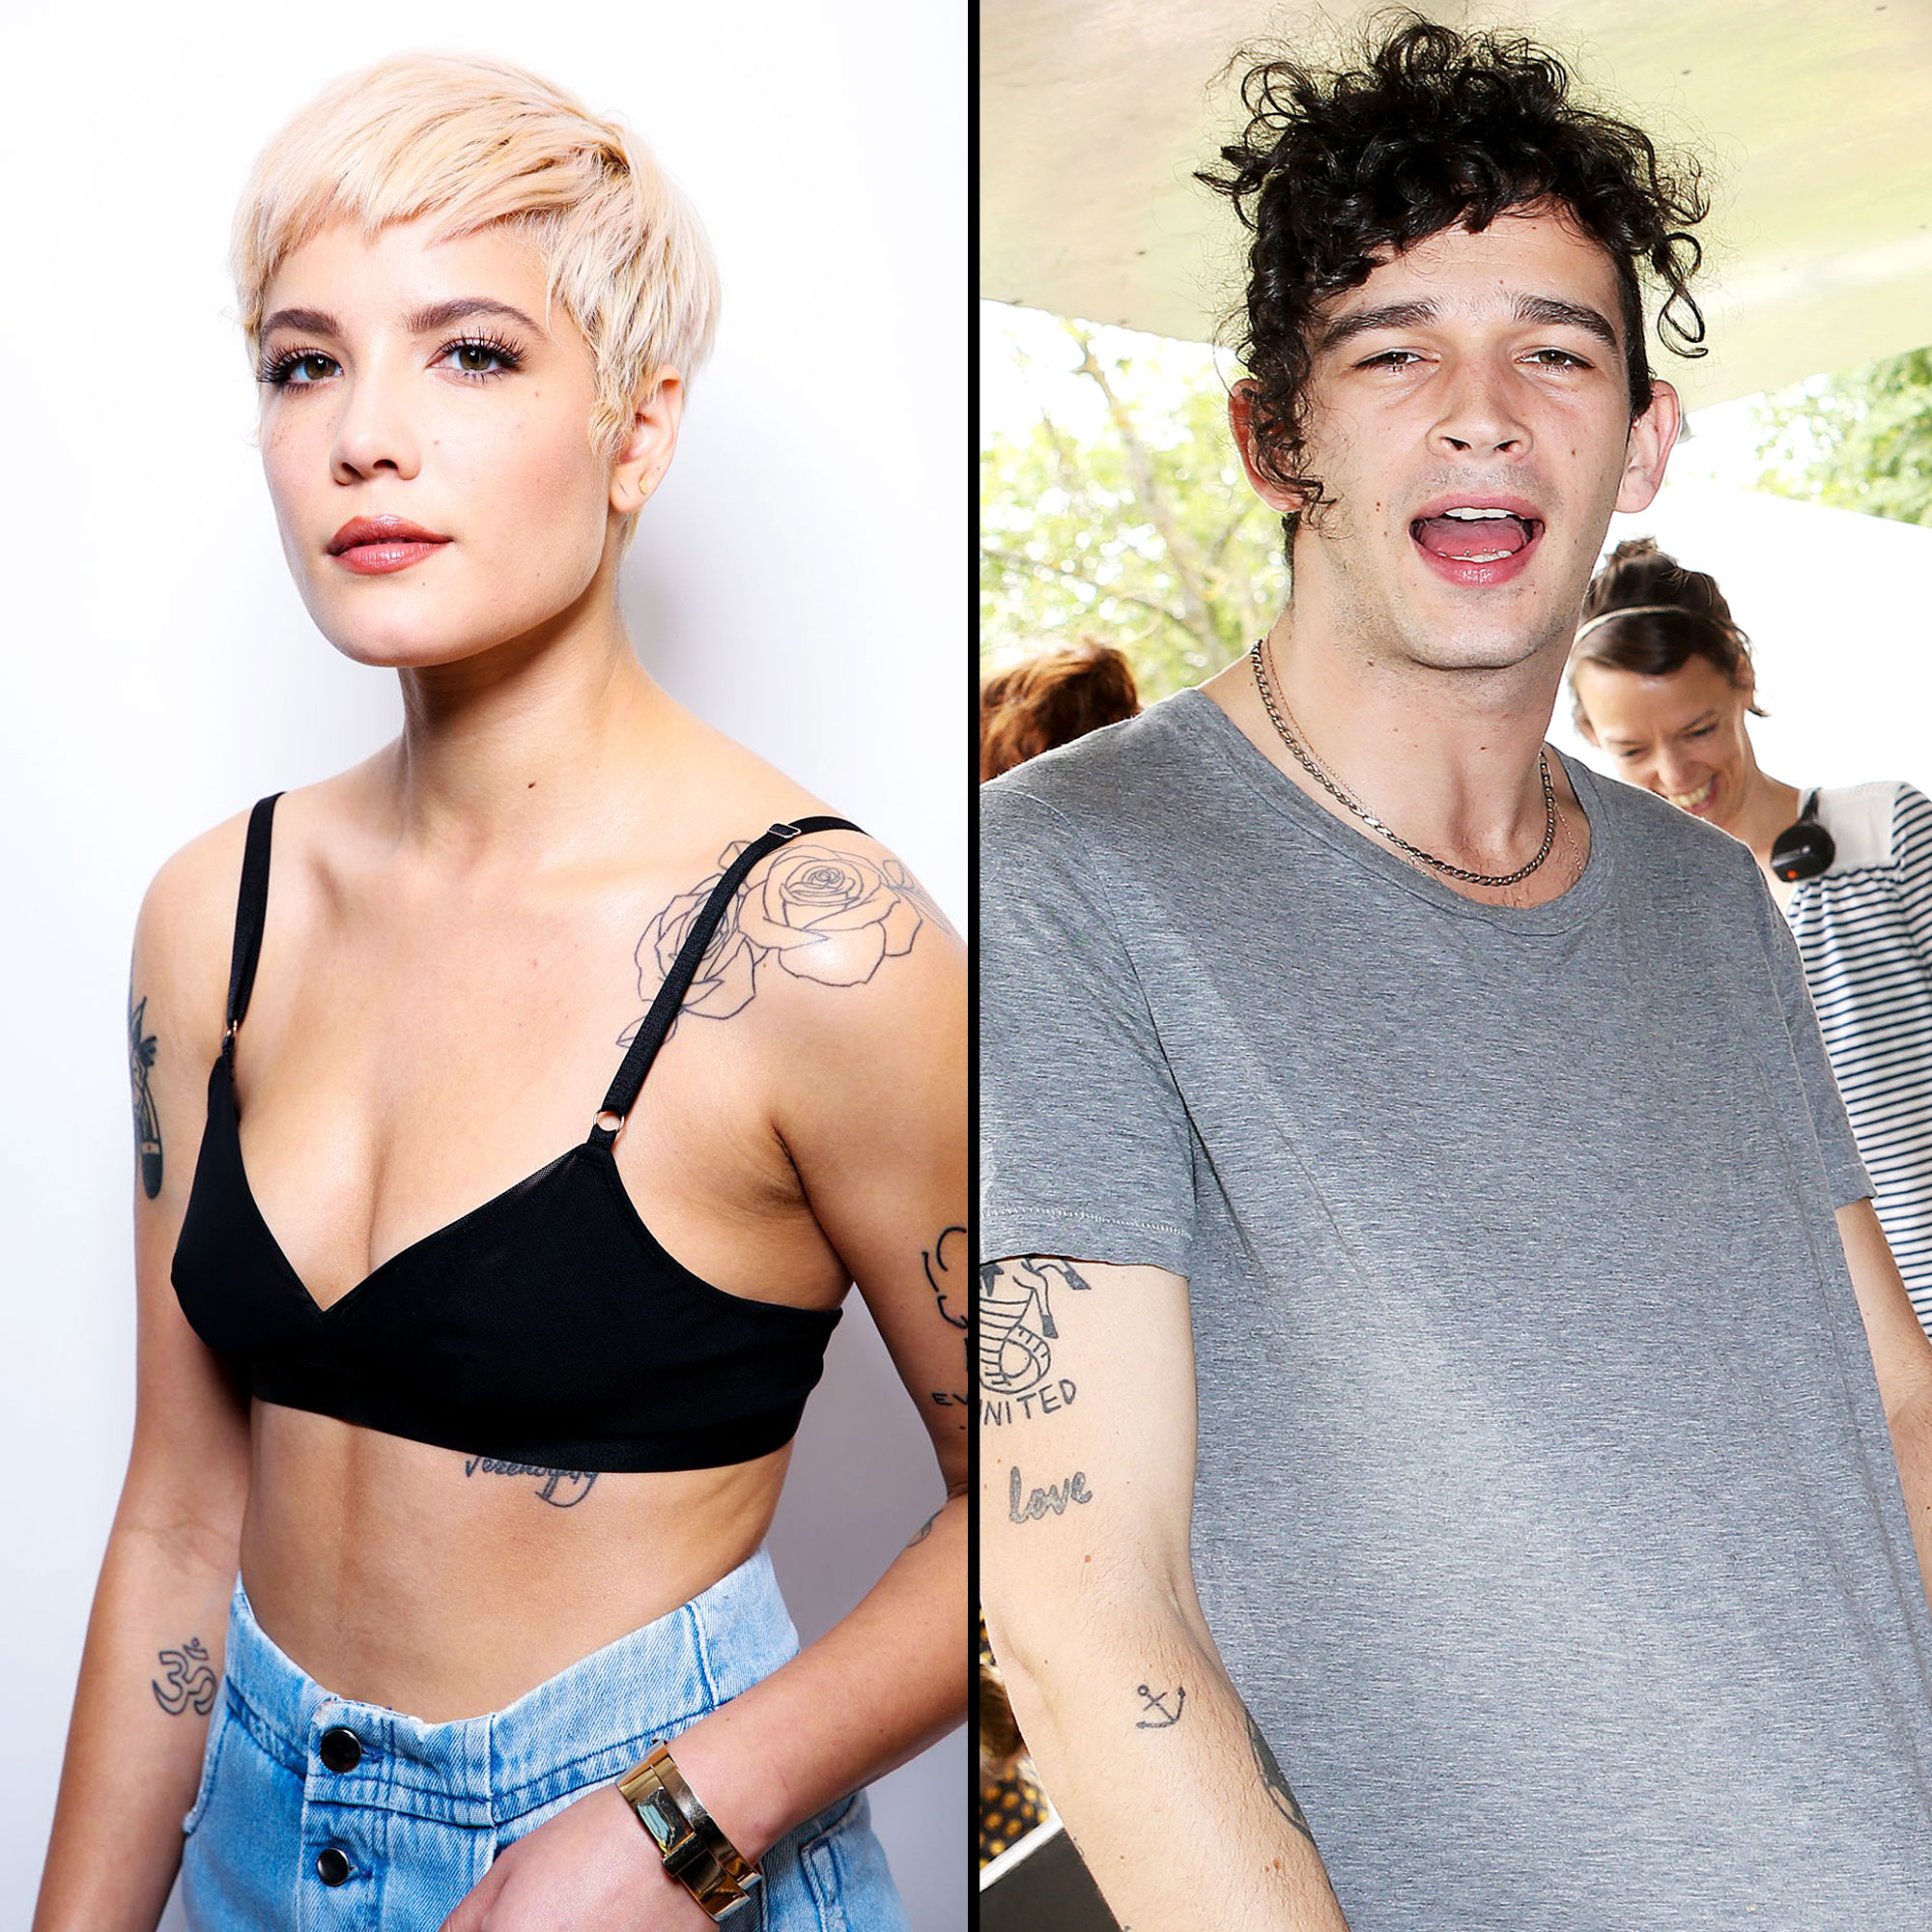 History halsey dating Halsey's Pregnant!